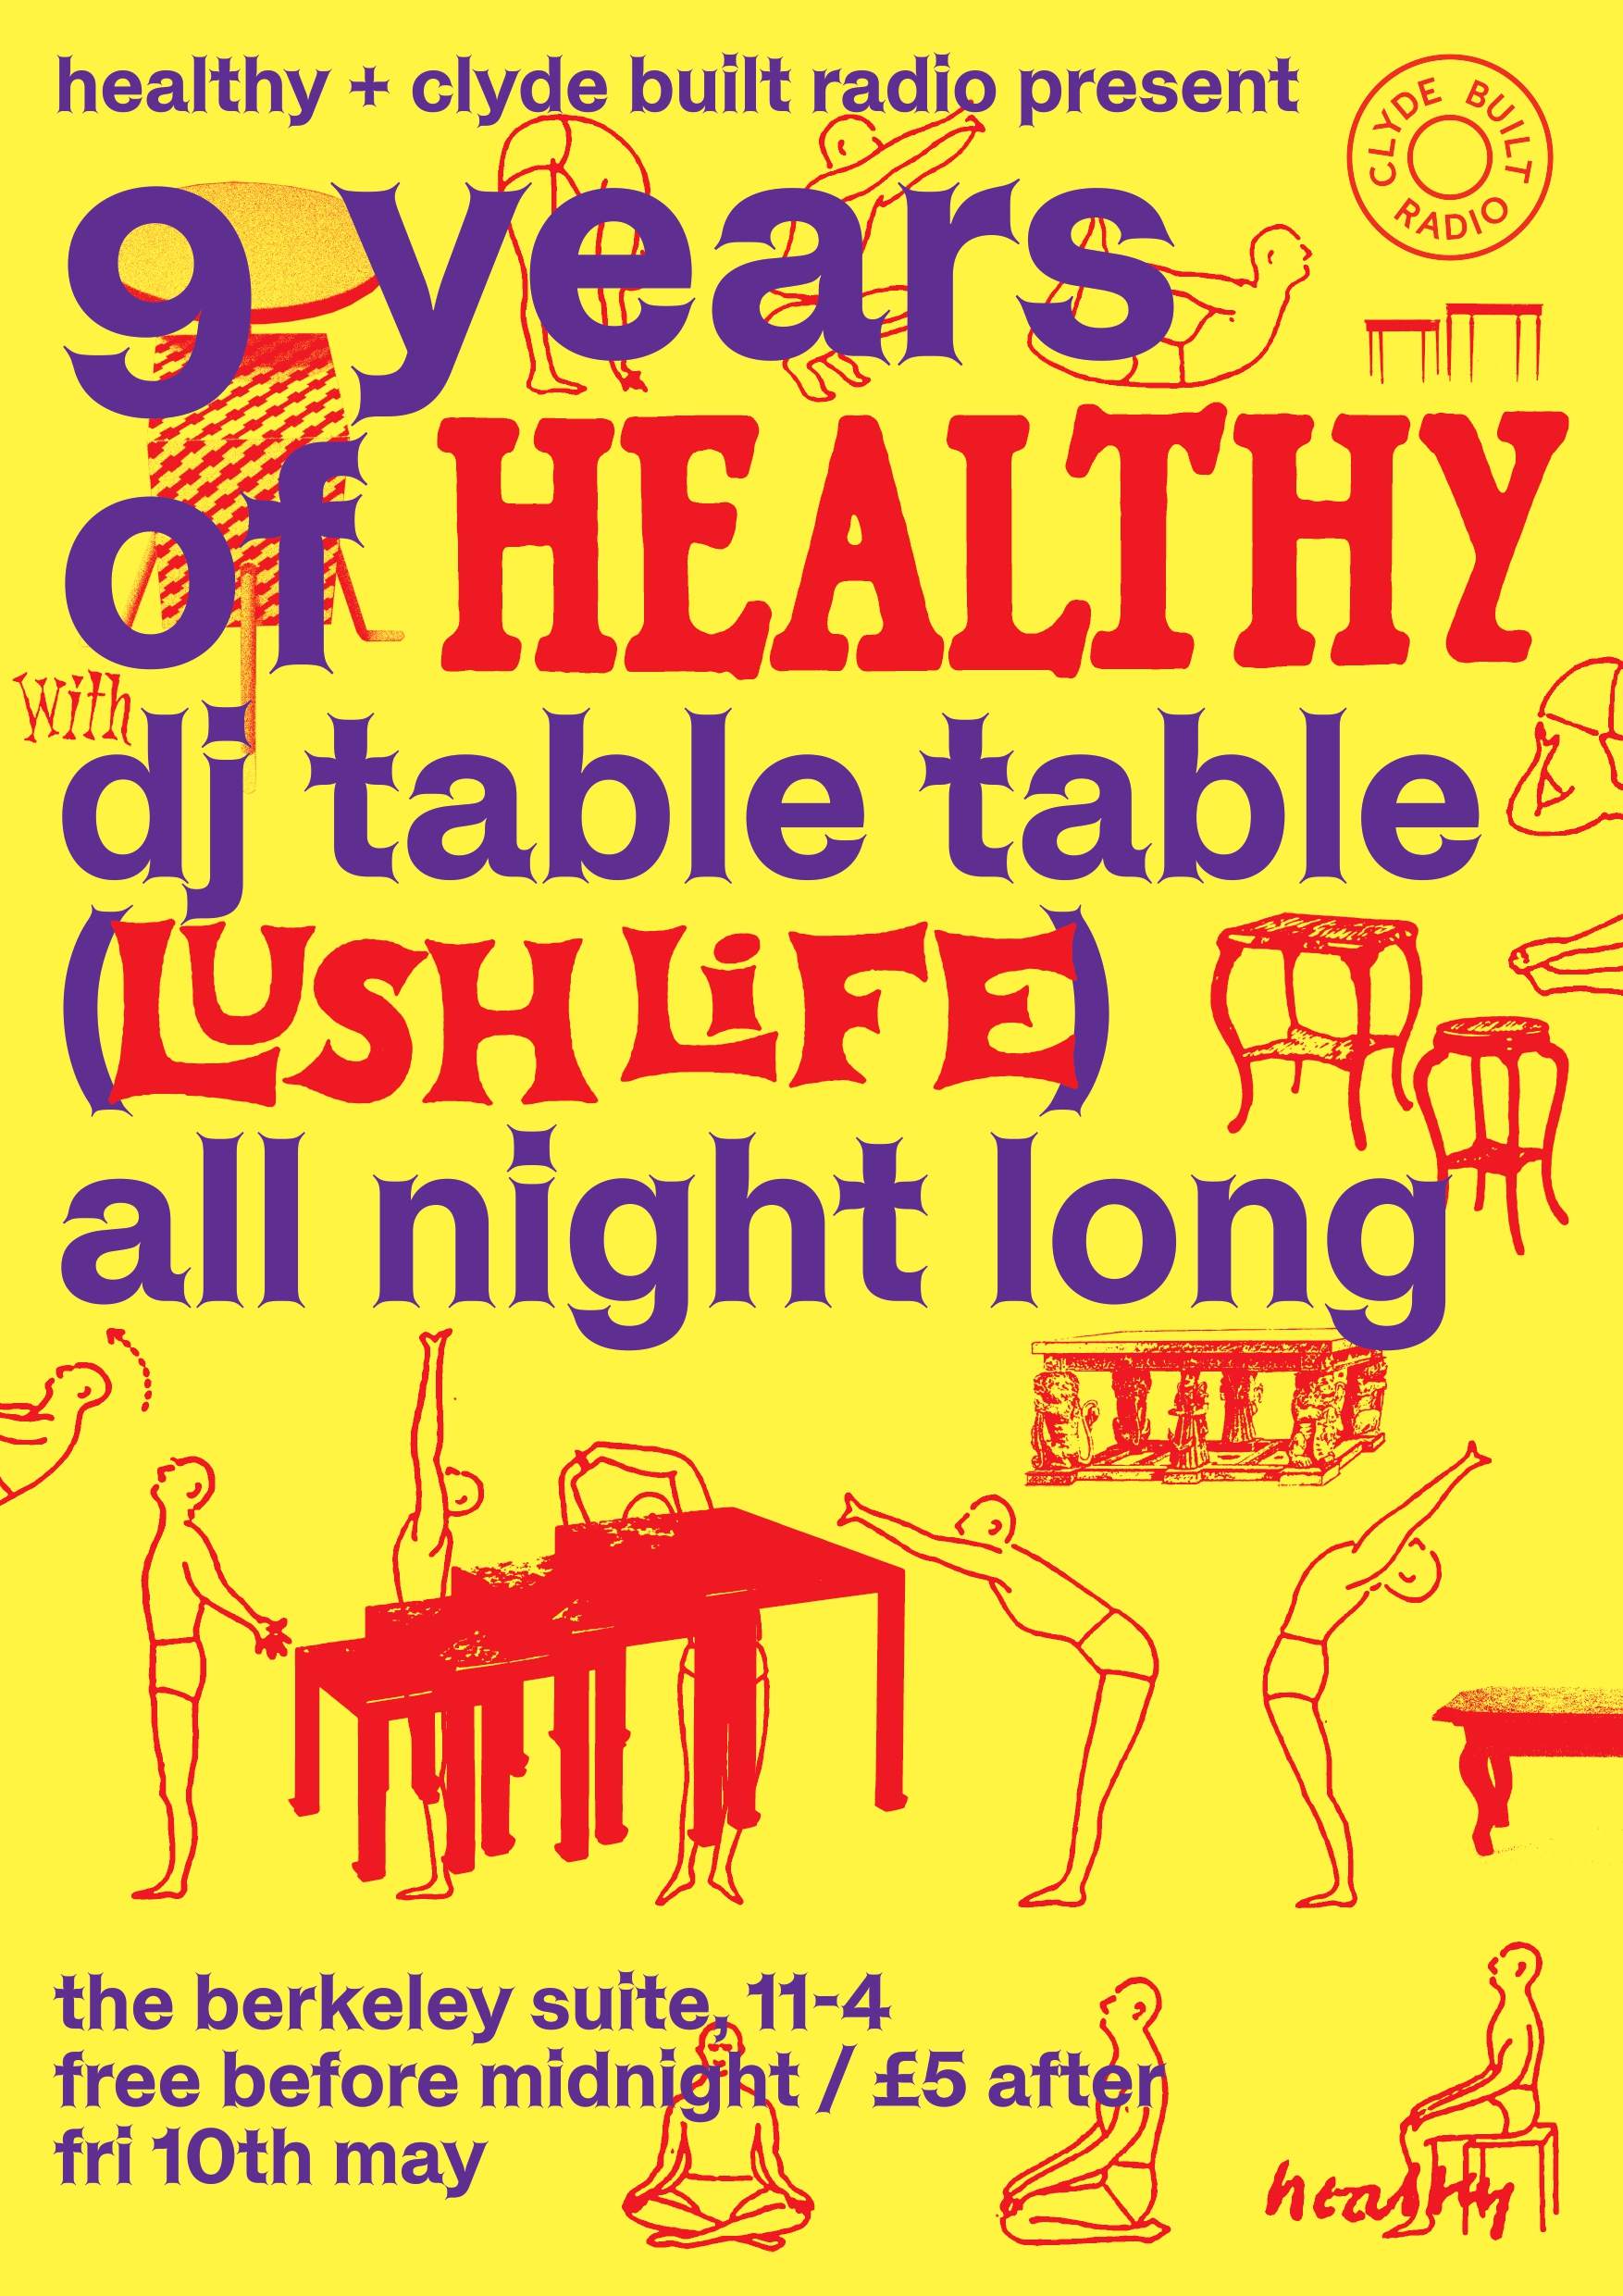 9 Years of HEALTHY w dj table table all night - Página frontal